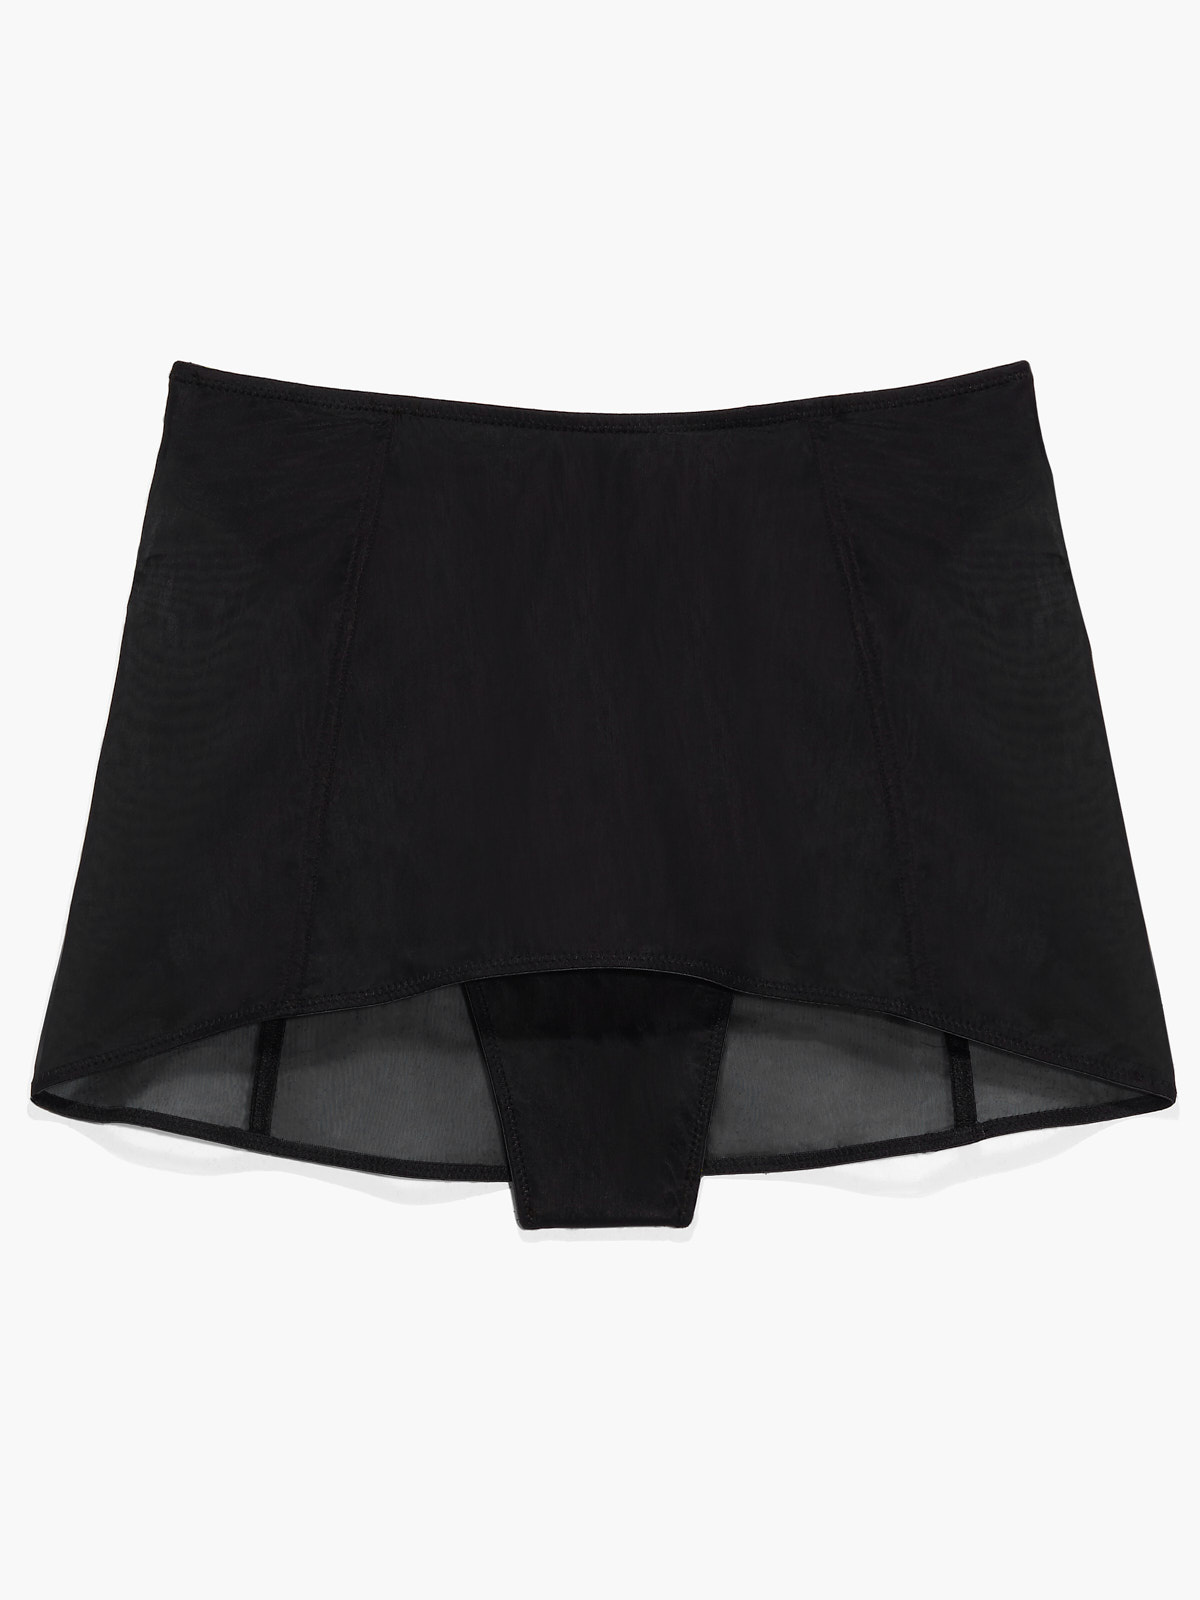 Skirted Underwear: The Skong is a Blend Between a Skirt and a Thong